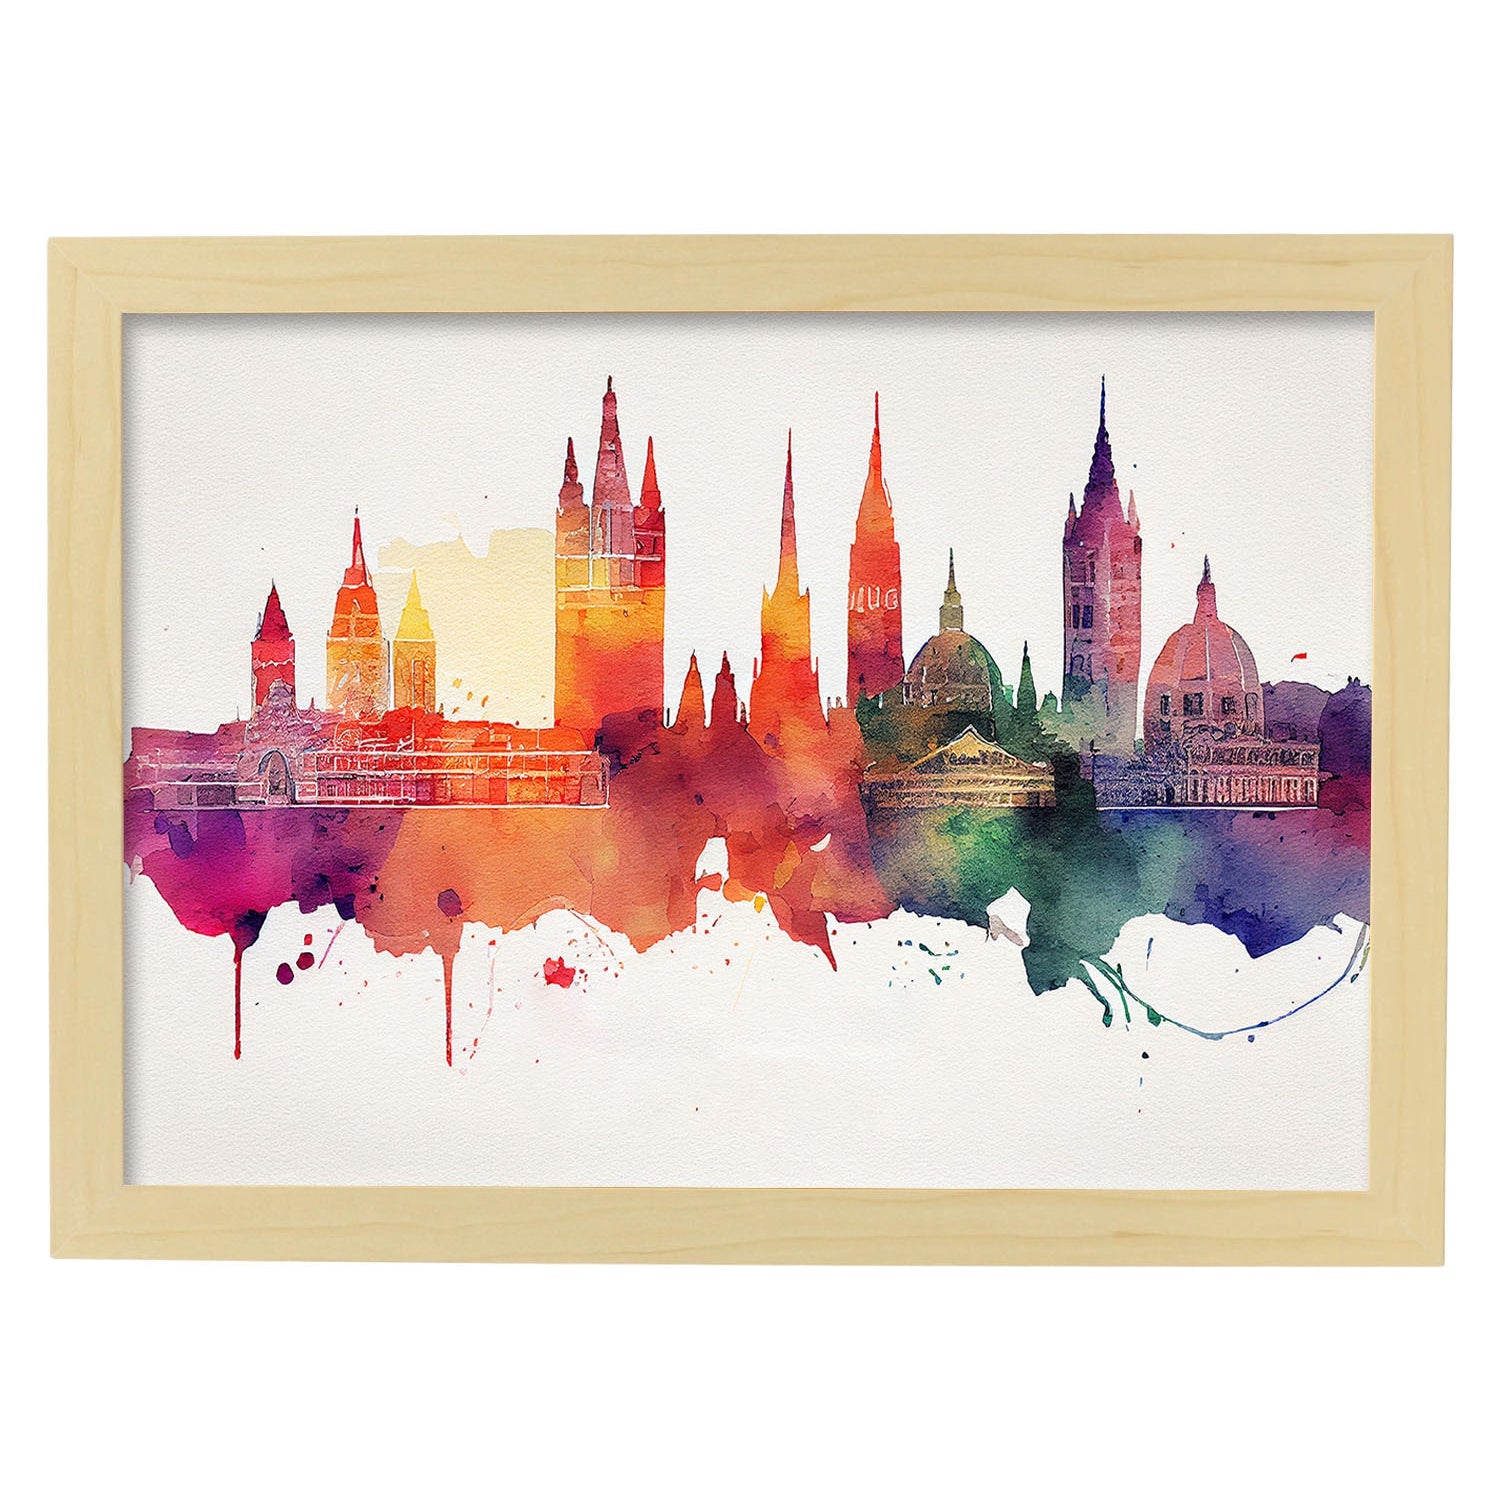 Nacnic watercolor of a skyline of the city of Vienna_3. Aesthetic Wall Art Prints for Bedroom or Living Room Design.-Artwork-Nacnic-A4-Marco Madera Clara-Nacnic Estudio SL